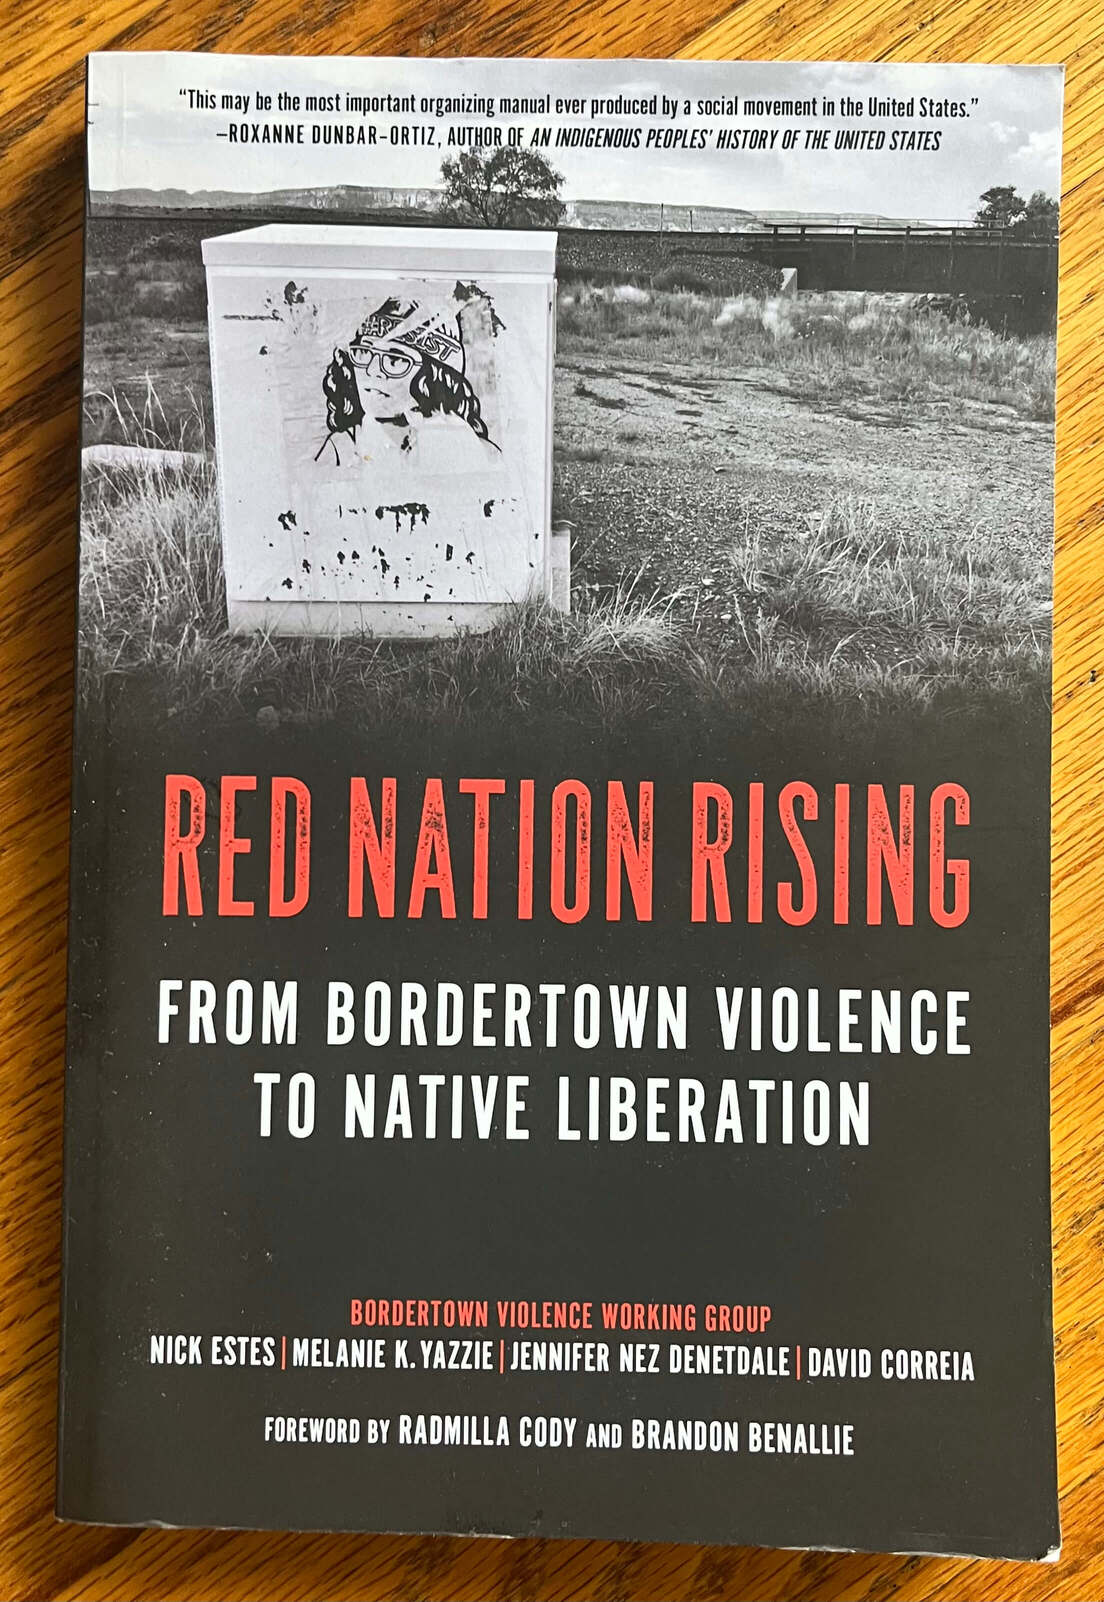 “Red Nation Rising: From Bordertown Violence to Native Liberation” By the Bordertown Violence Working Group, Nick Estes, Melanie K. Yazzie, Jennifer Nez Denetdale, and David Correia. Foreword by Radmilla Cody and Brandon Benallie.